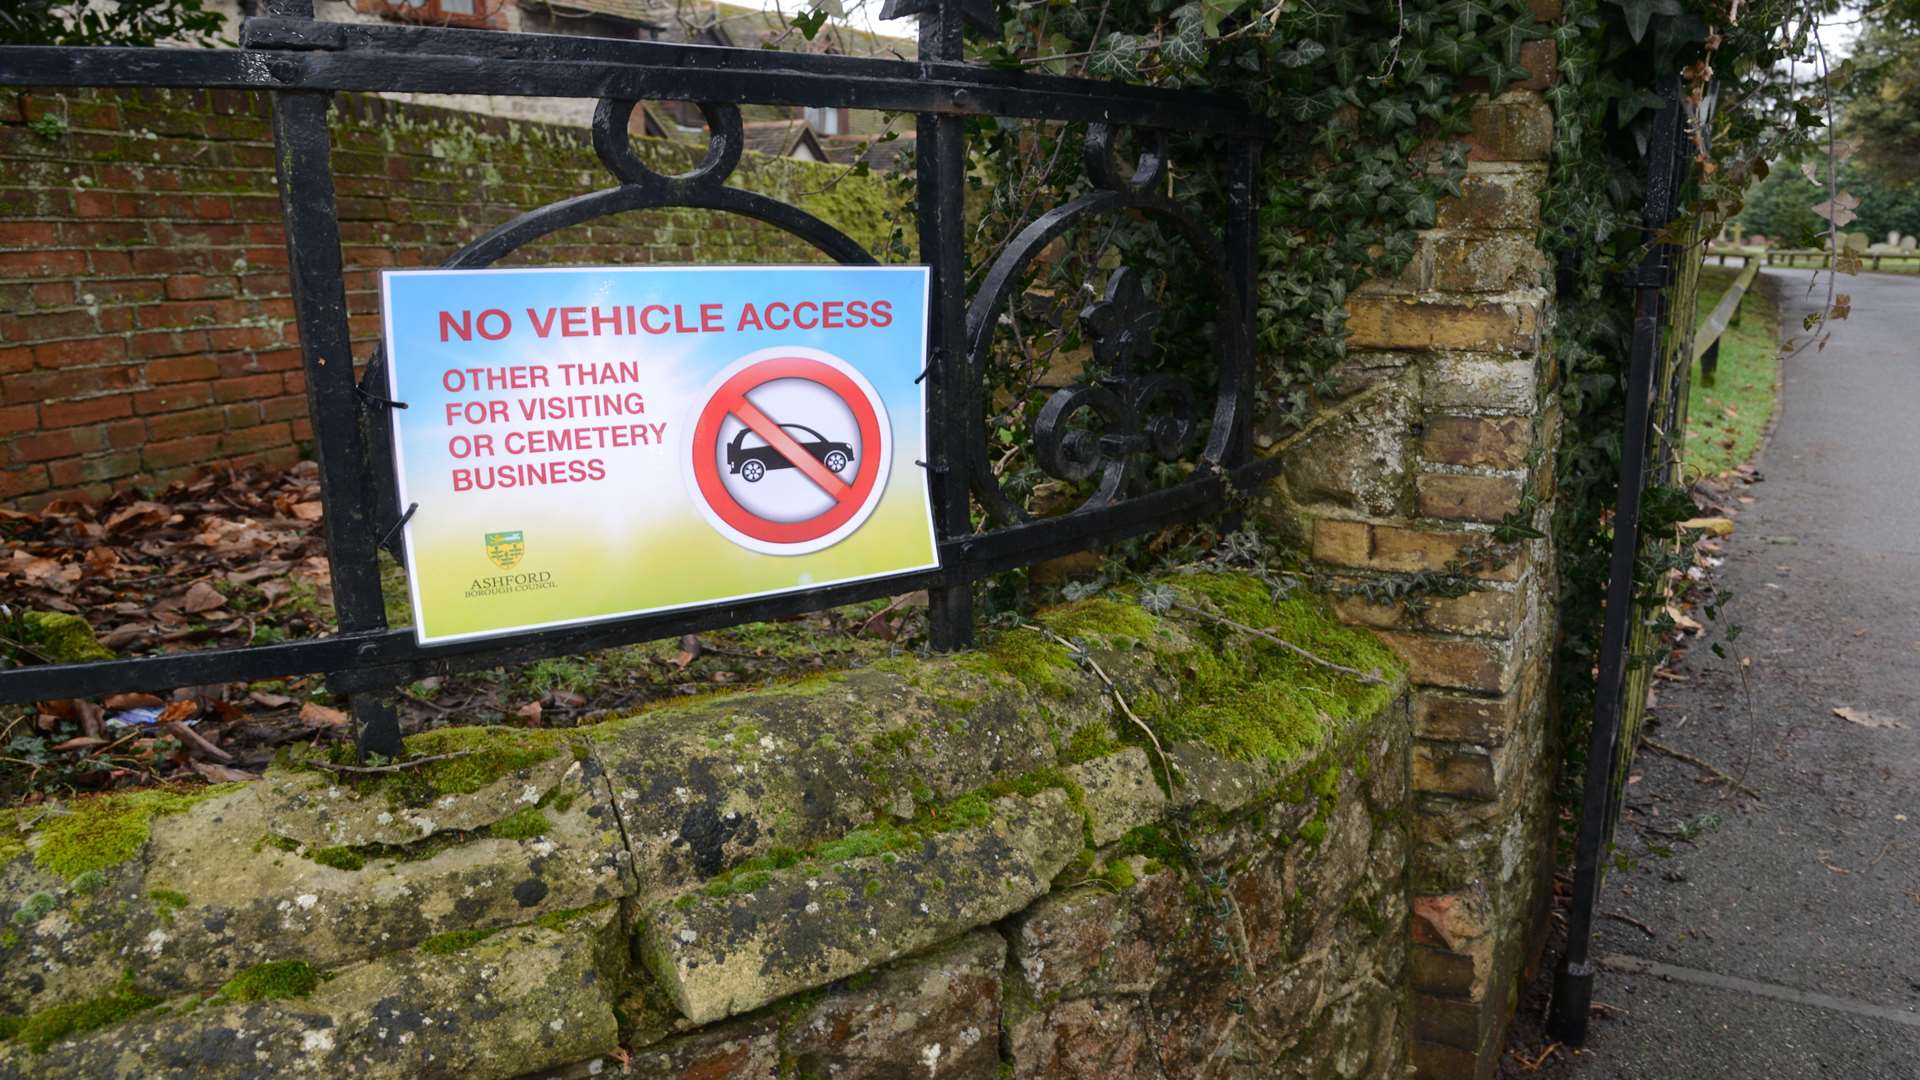 Signs have been put up by the entrance in a bid to stop people parking in the cemetery